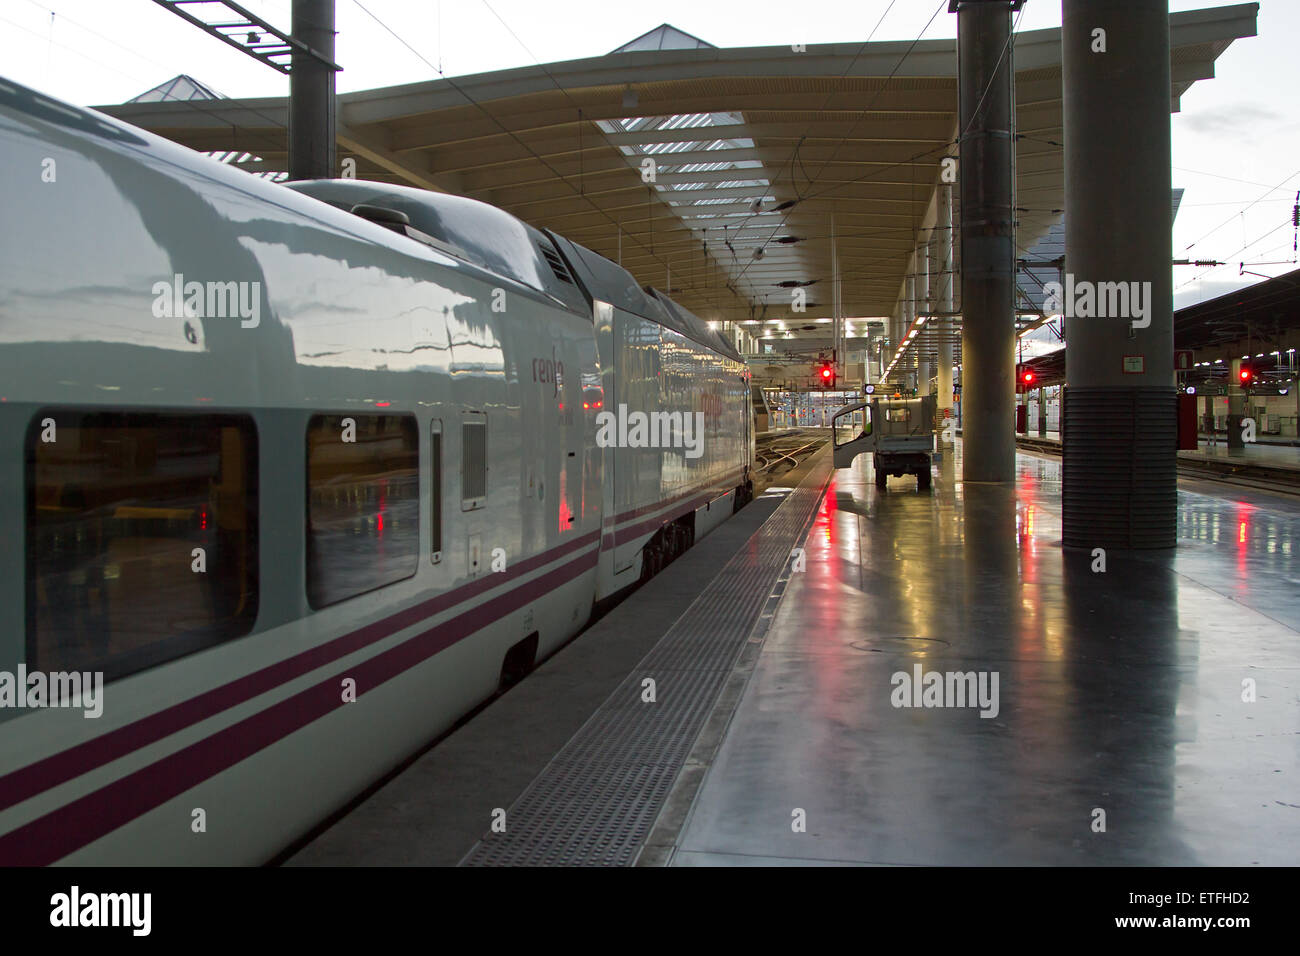 The Atocha Train Station. A high speed train is loading for an early morning commute. Stock Photo